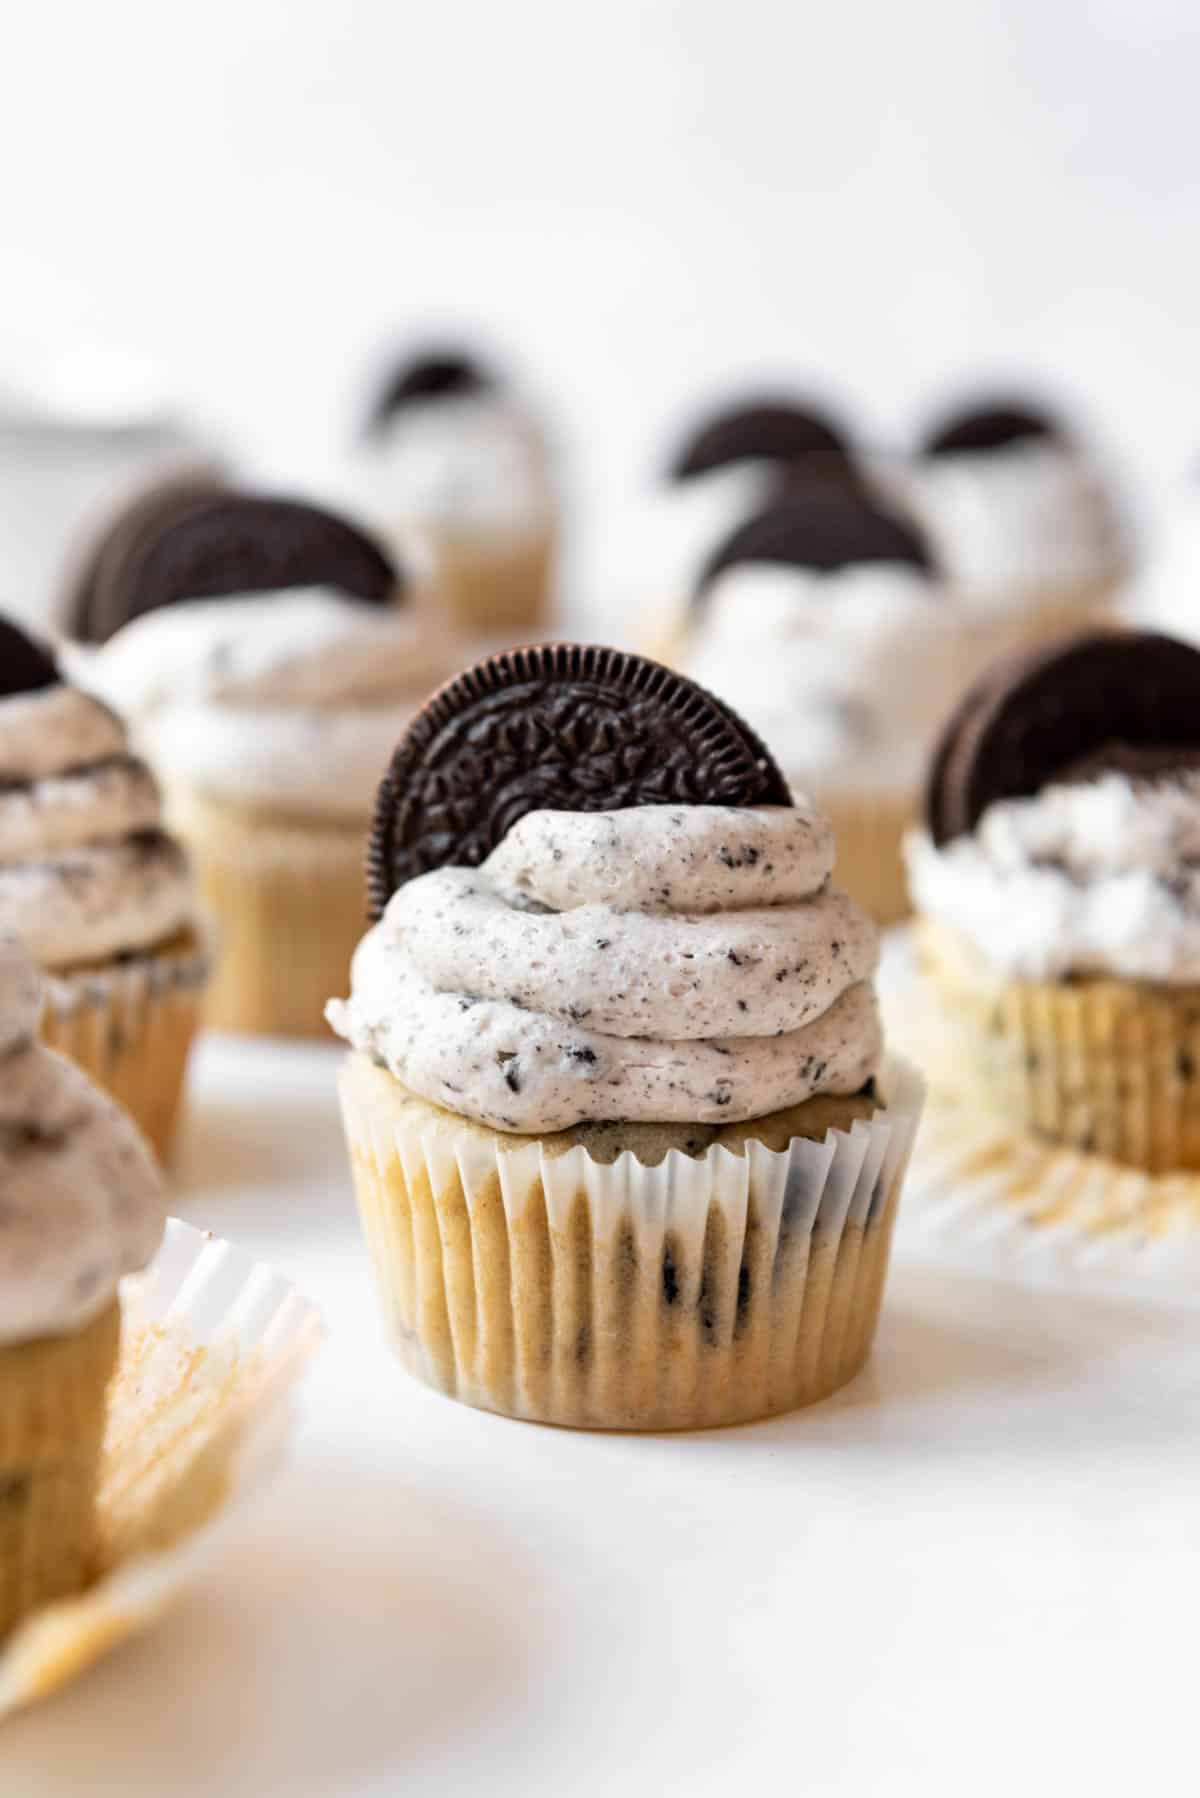 Profile shot of Oreo Cupcakes with Oreo frosting and an Oreo cookie on tip.